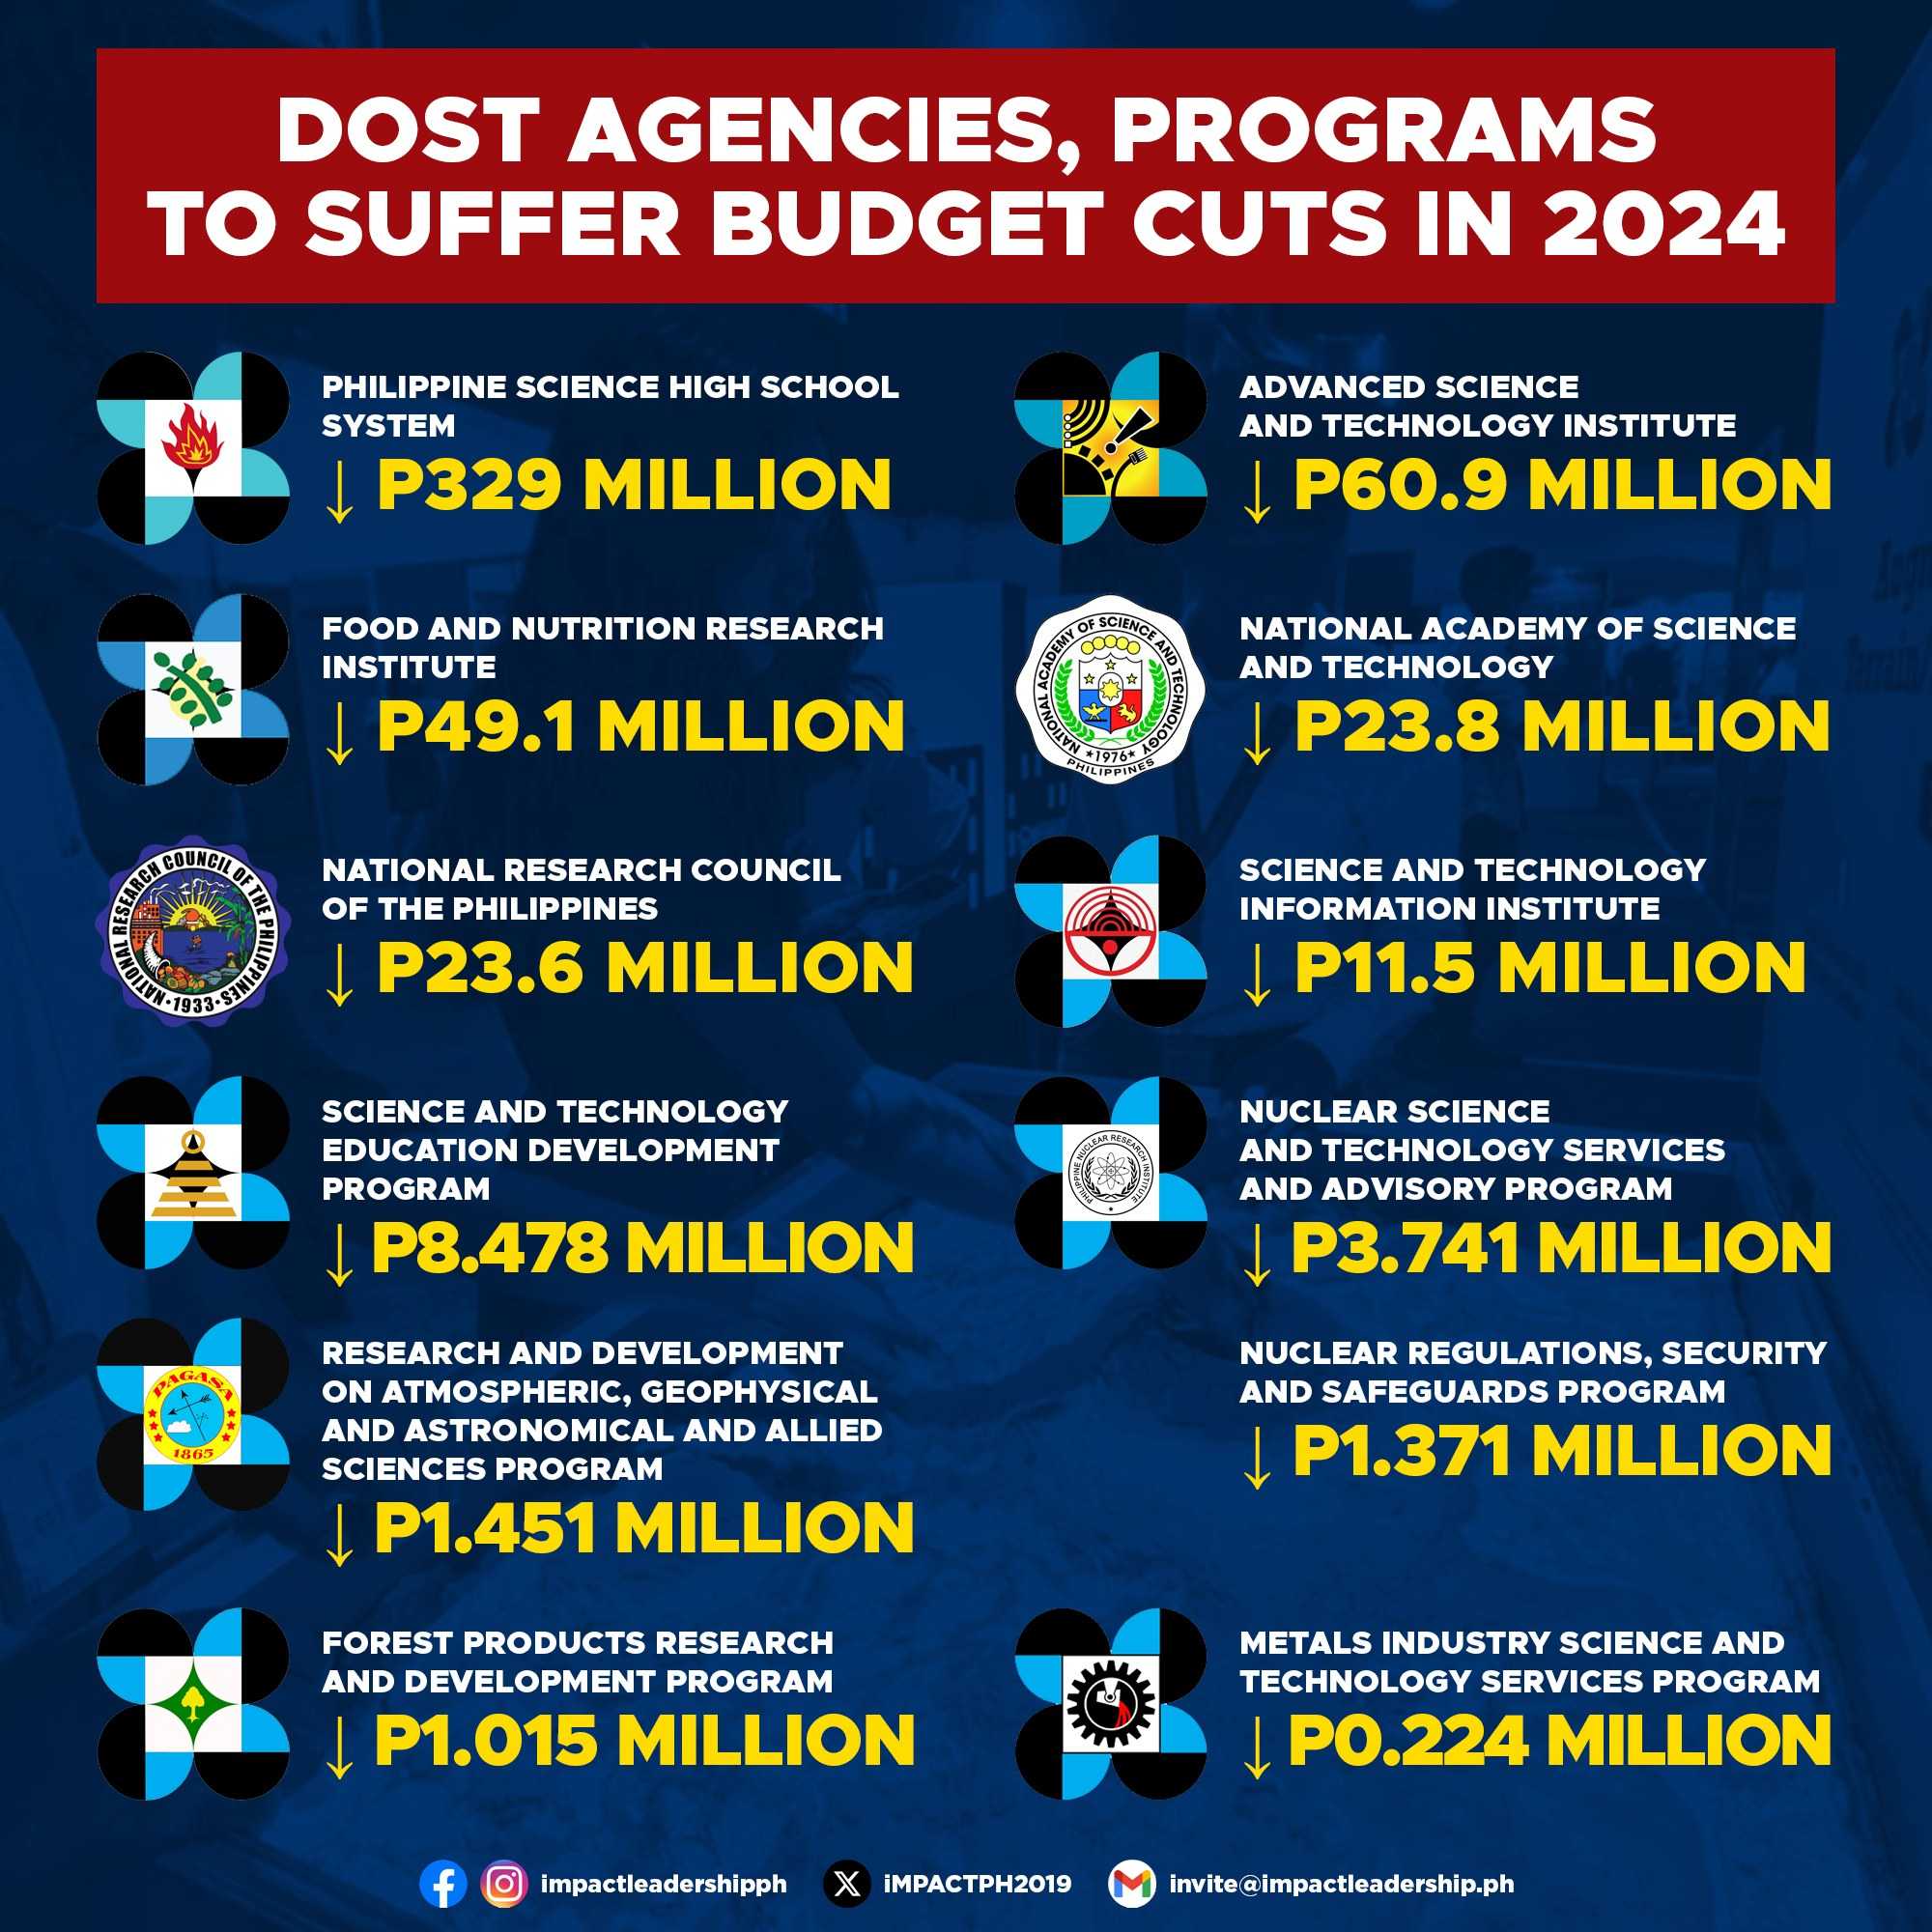 DOST agencies, programs to suffer budget cut in 2024